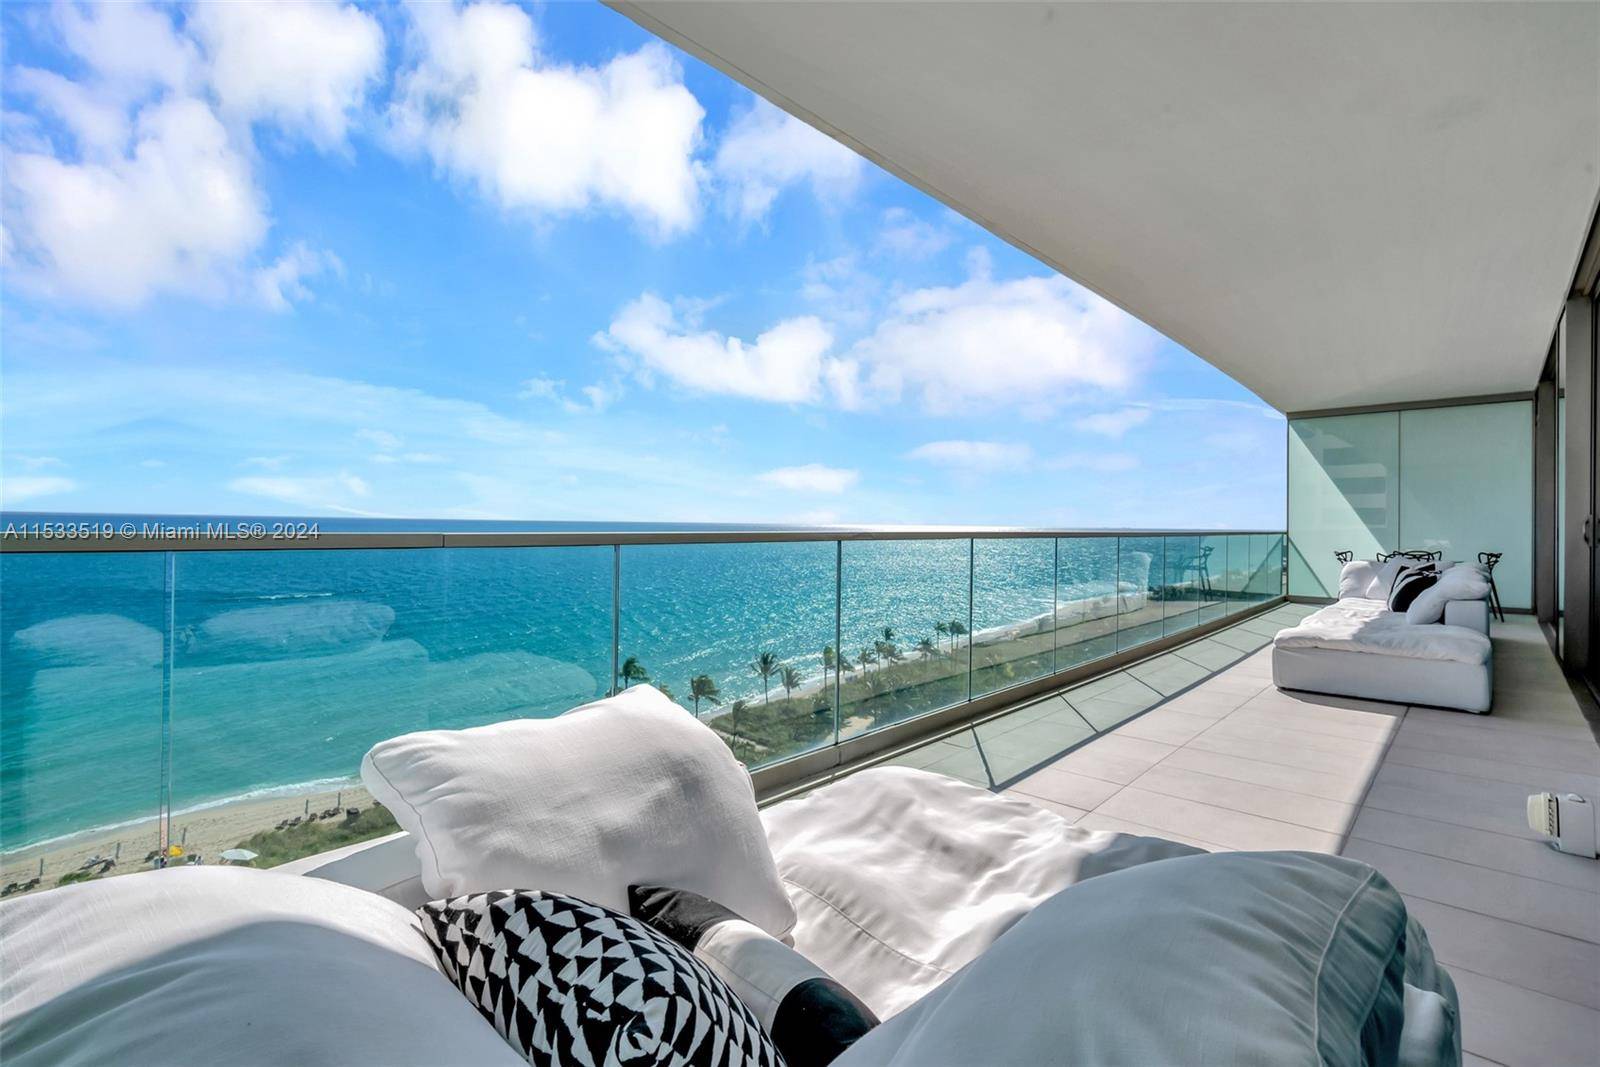 OCEANFRONT MIAMI DREAM RESIDENCE ! Enjoy panoramic ocean views from an exceptional super luxury residence in Miami, USA